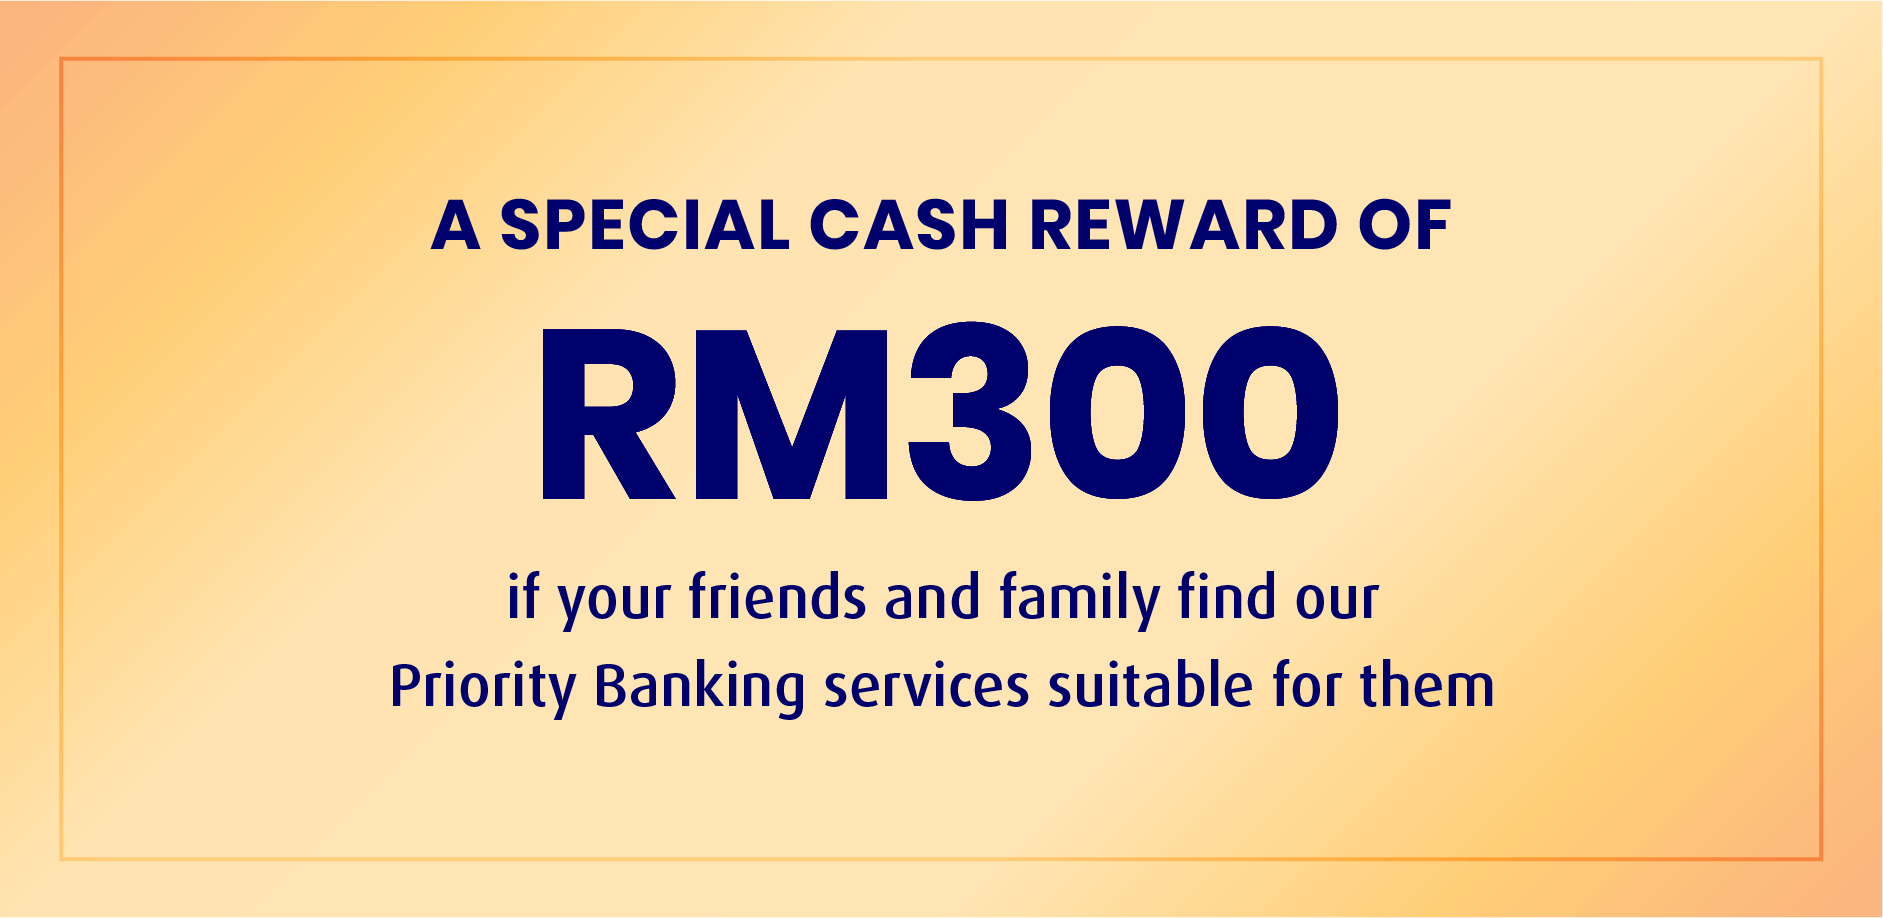 A SPECIAL CASH REWARD OF RM300 if your friends and family find our Priority Banking services suitable for them